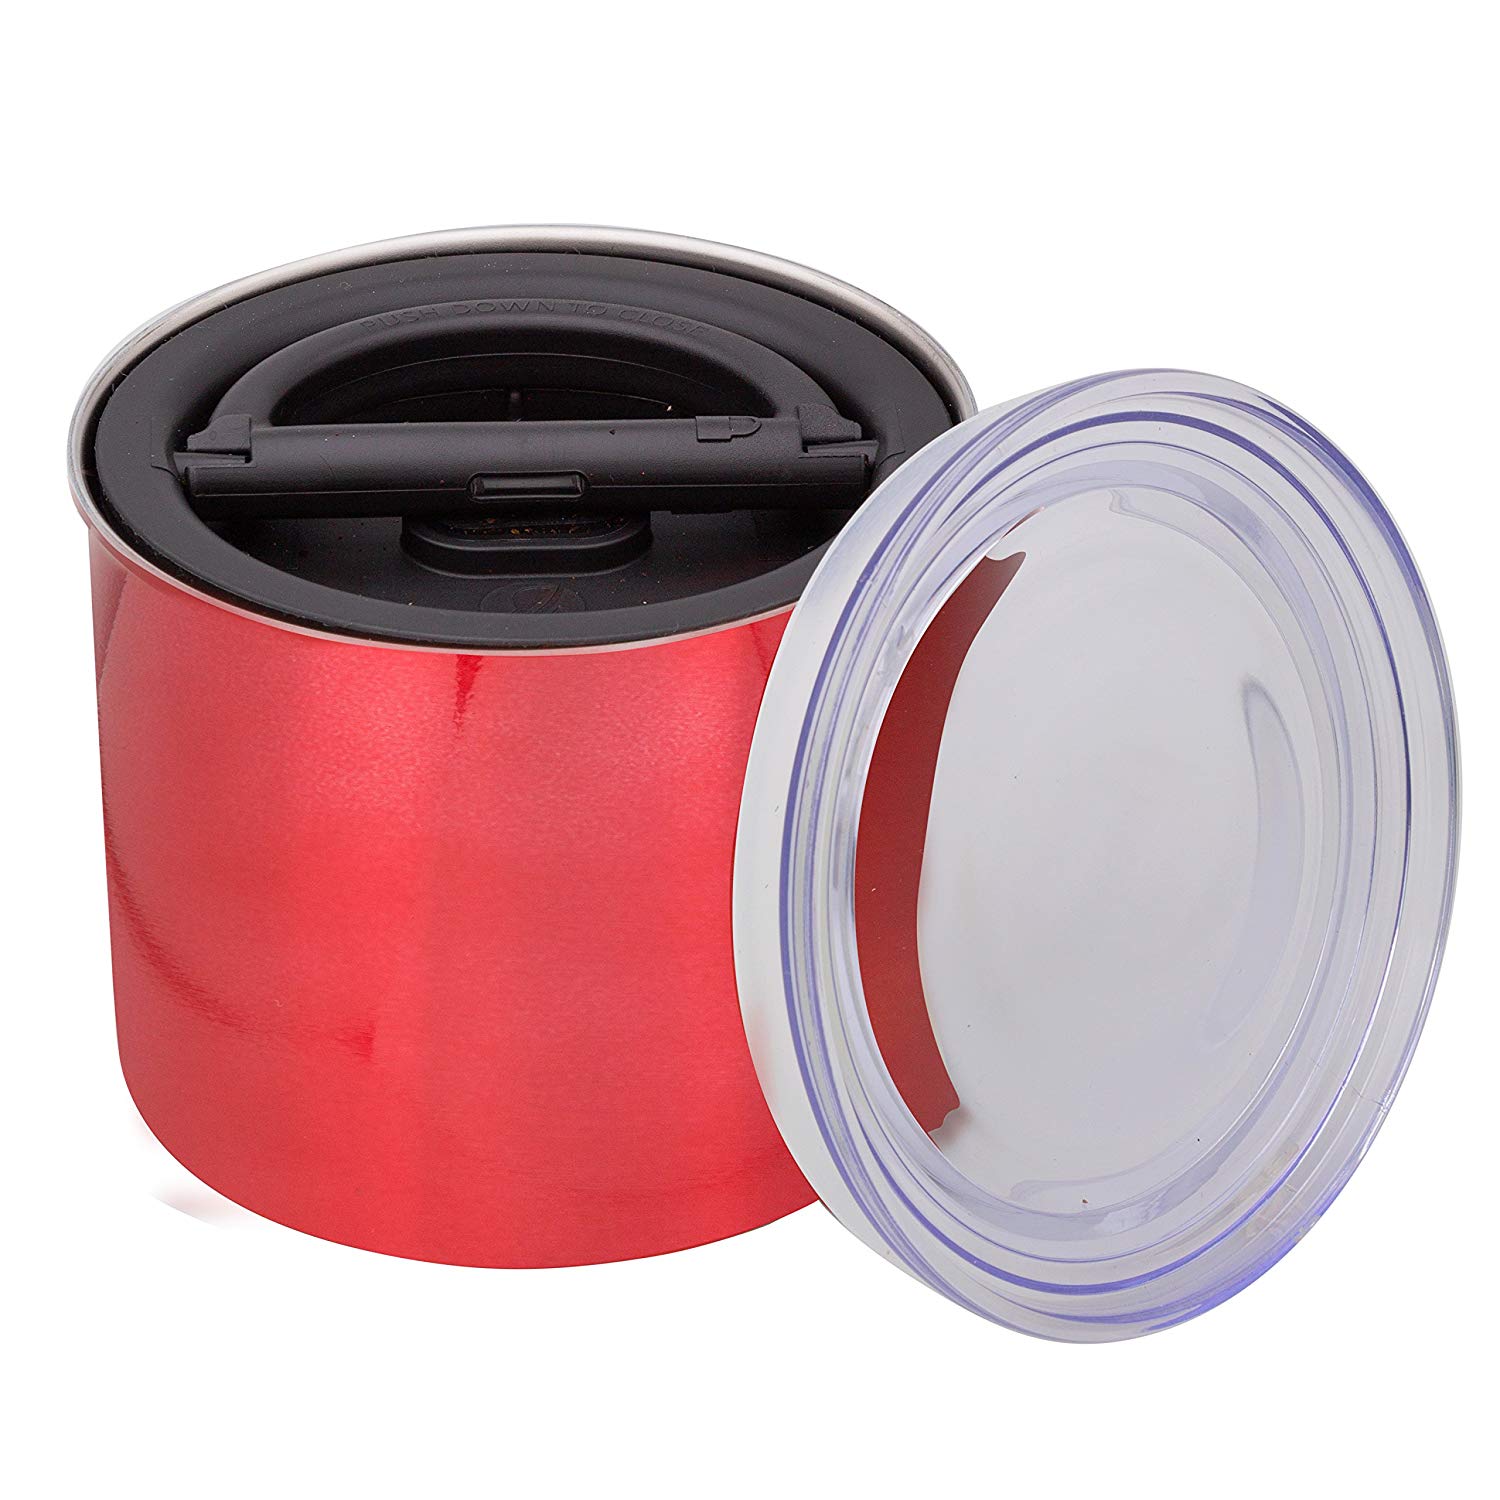 Planetary Design AirScape Classic Stainless Steel 32oz Coffee Canister 4" - Candy Apple Red